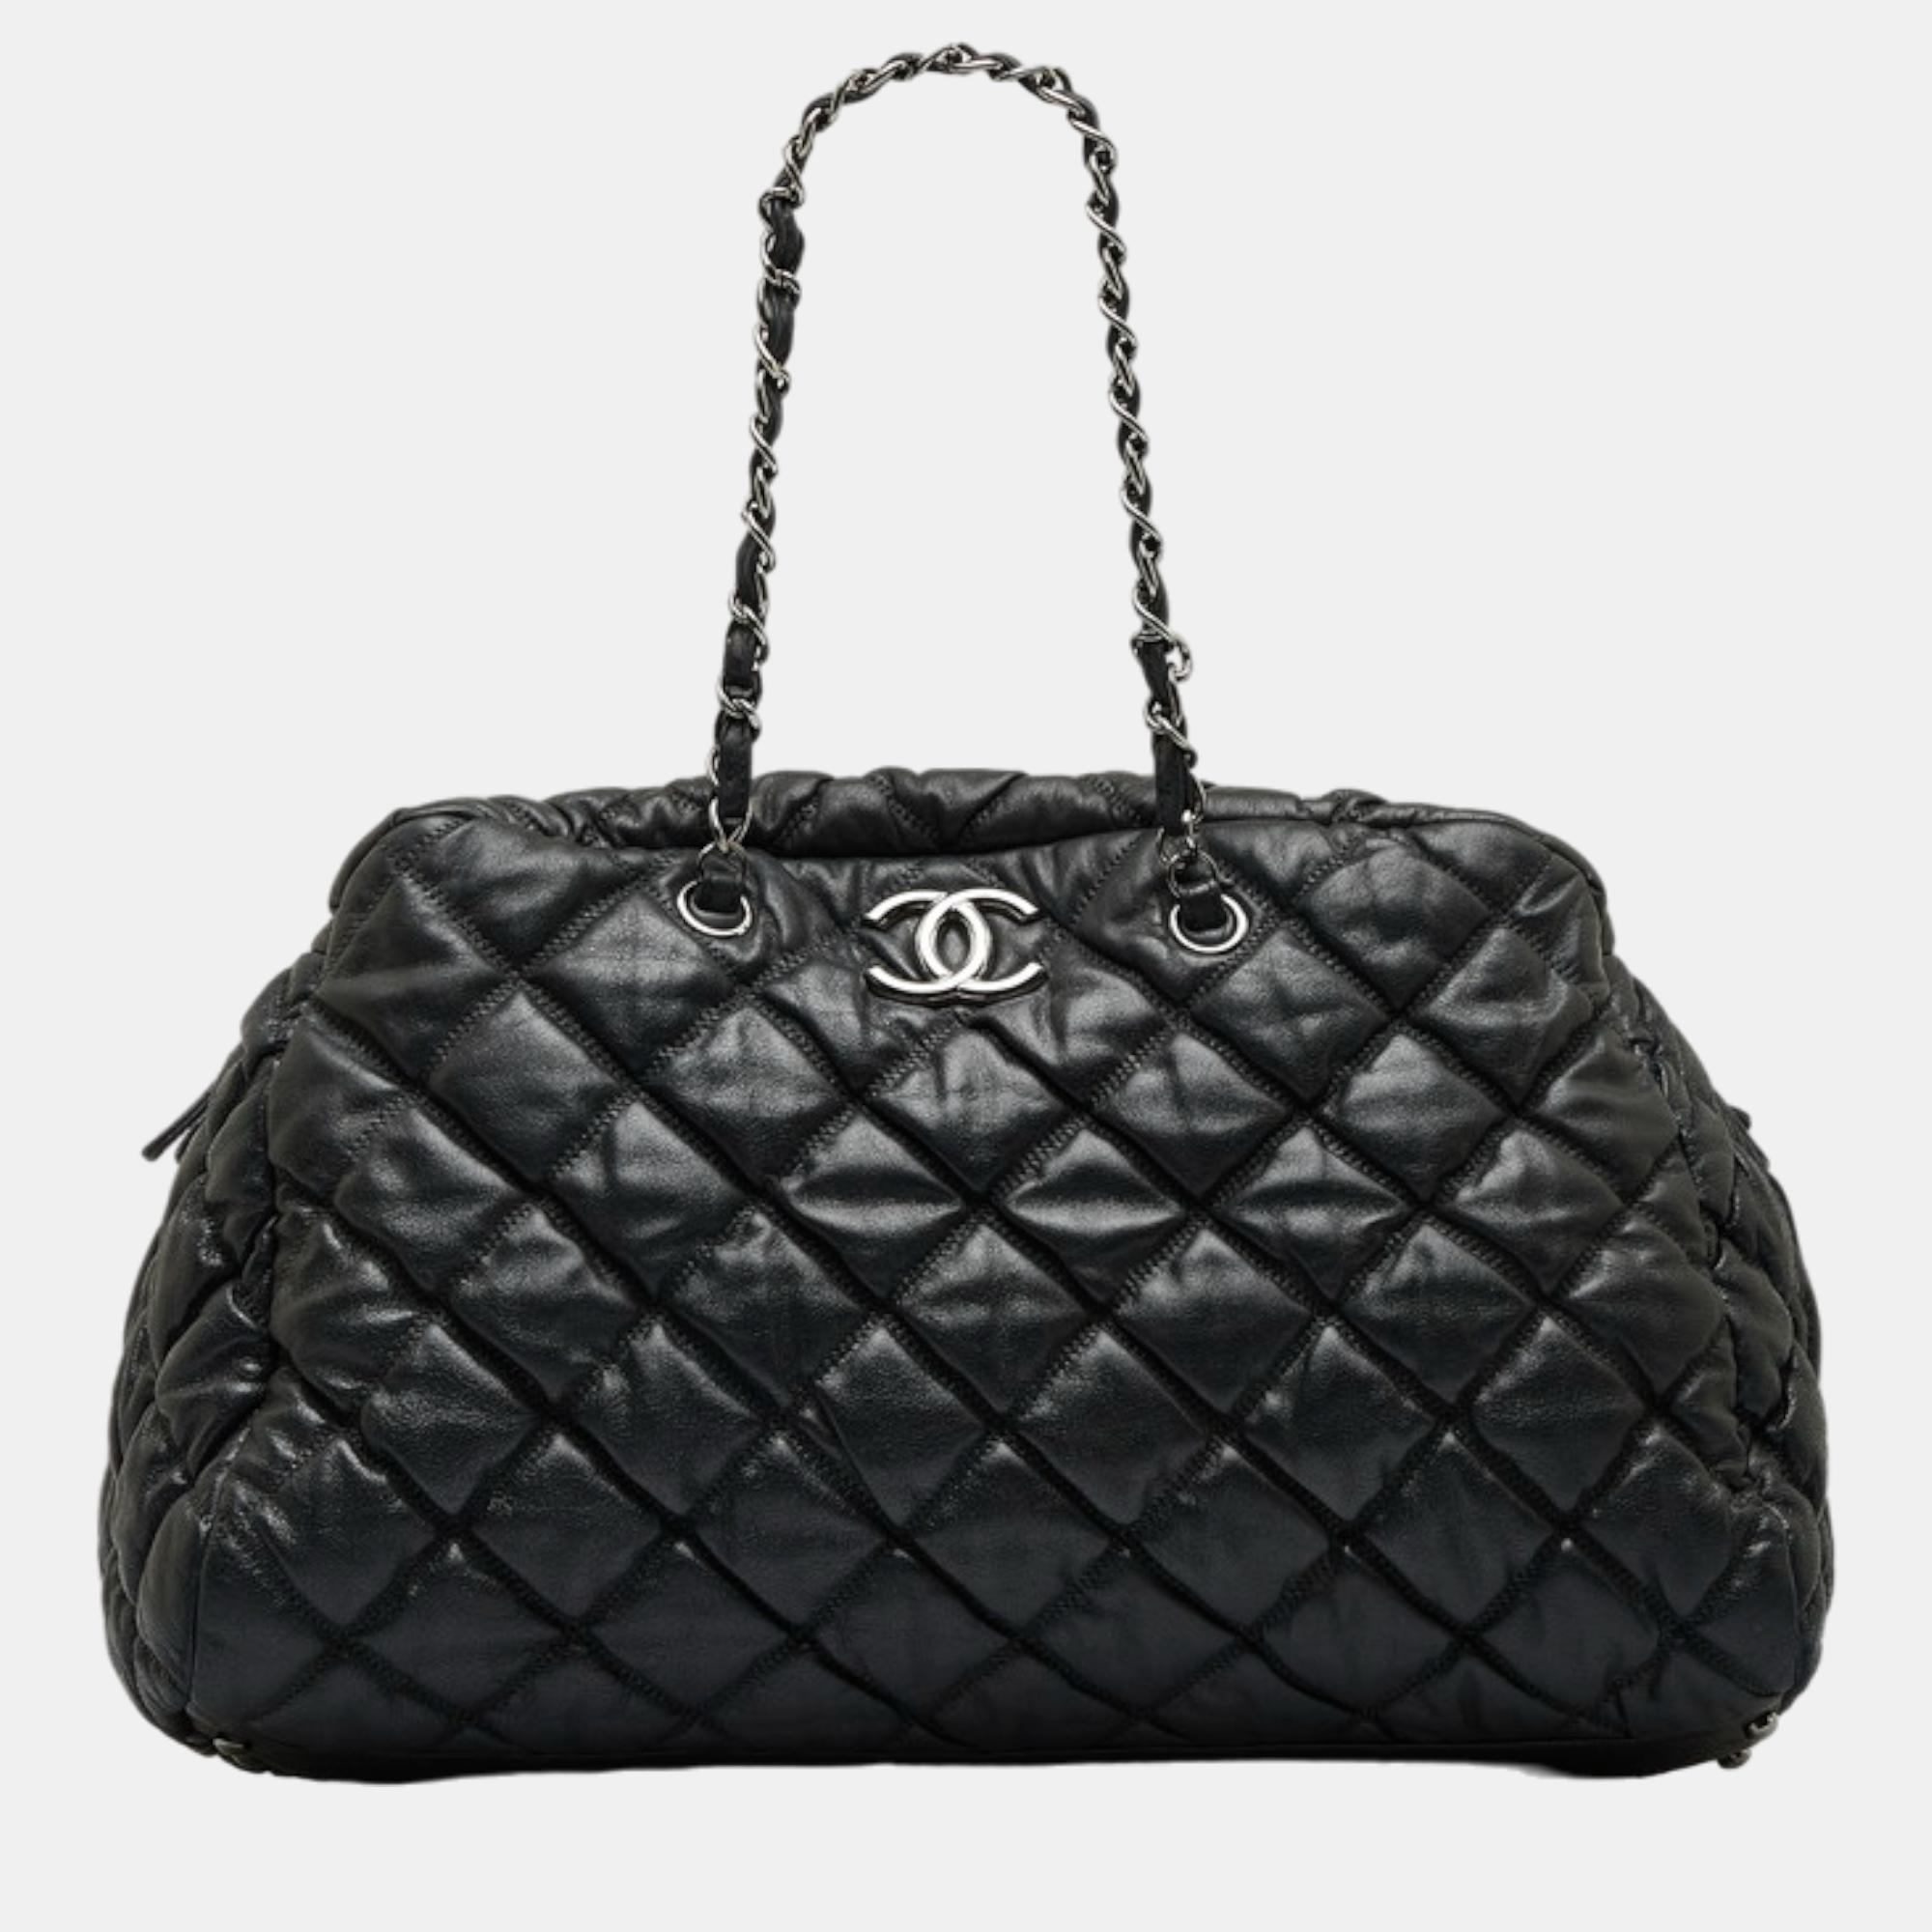 Chanel Black Leather CC Quilted Leather Chain Zip Tote Tote Bag